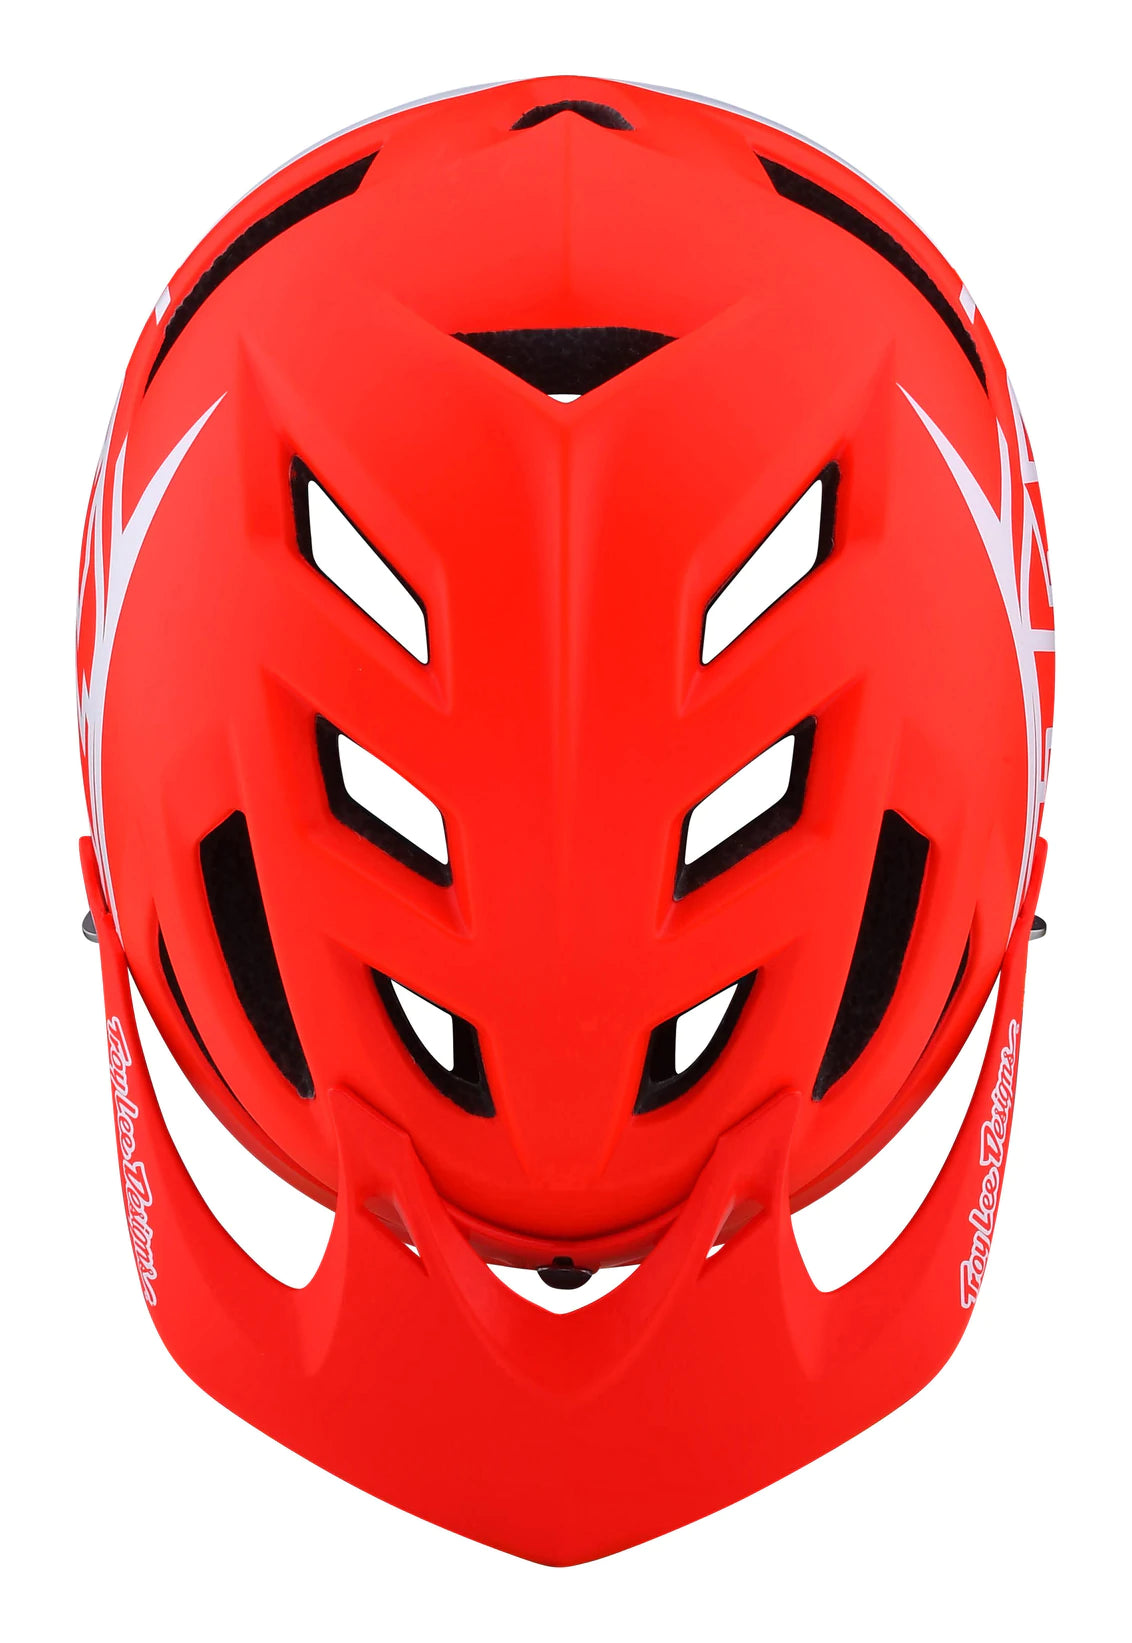 Helmet Troy Lee A1 Drone Youth